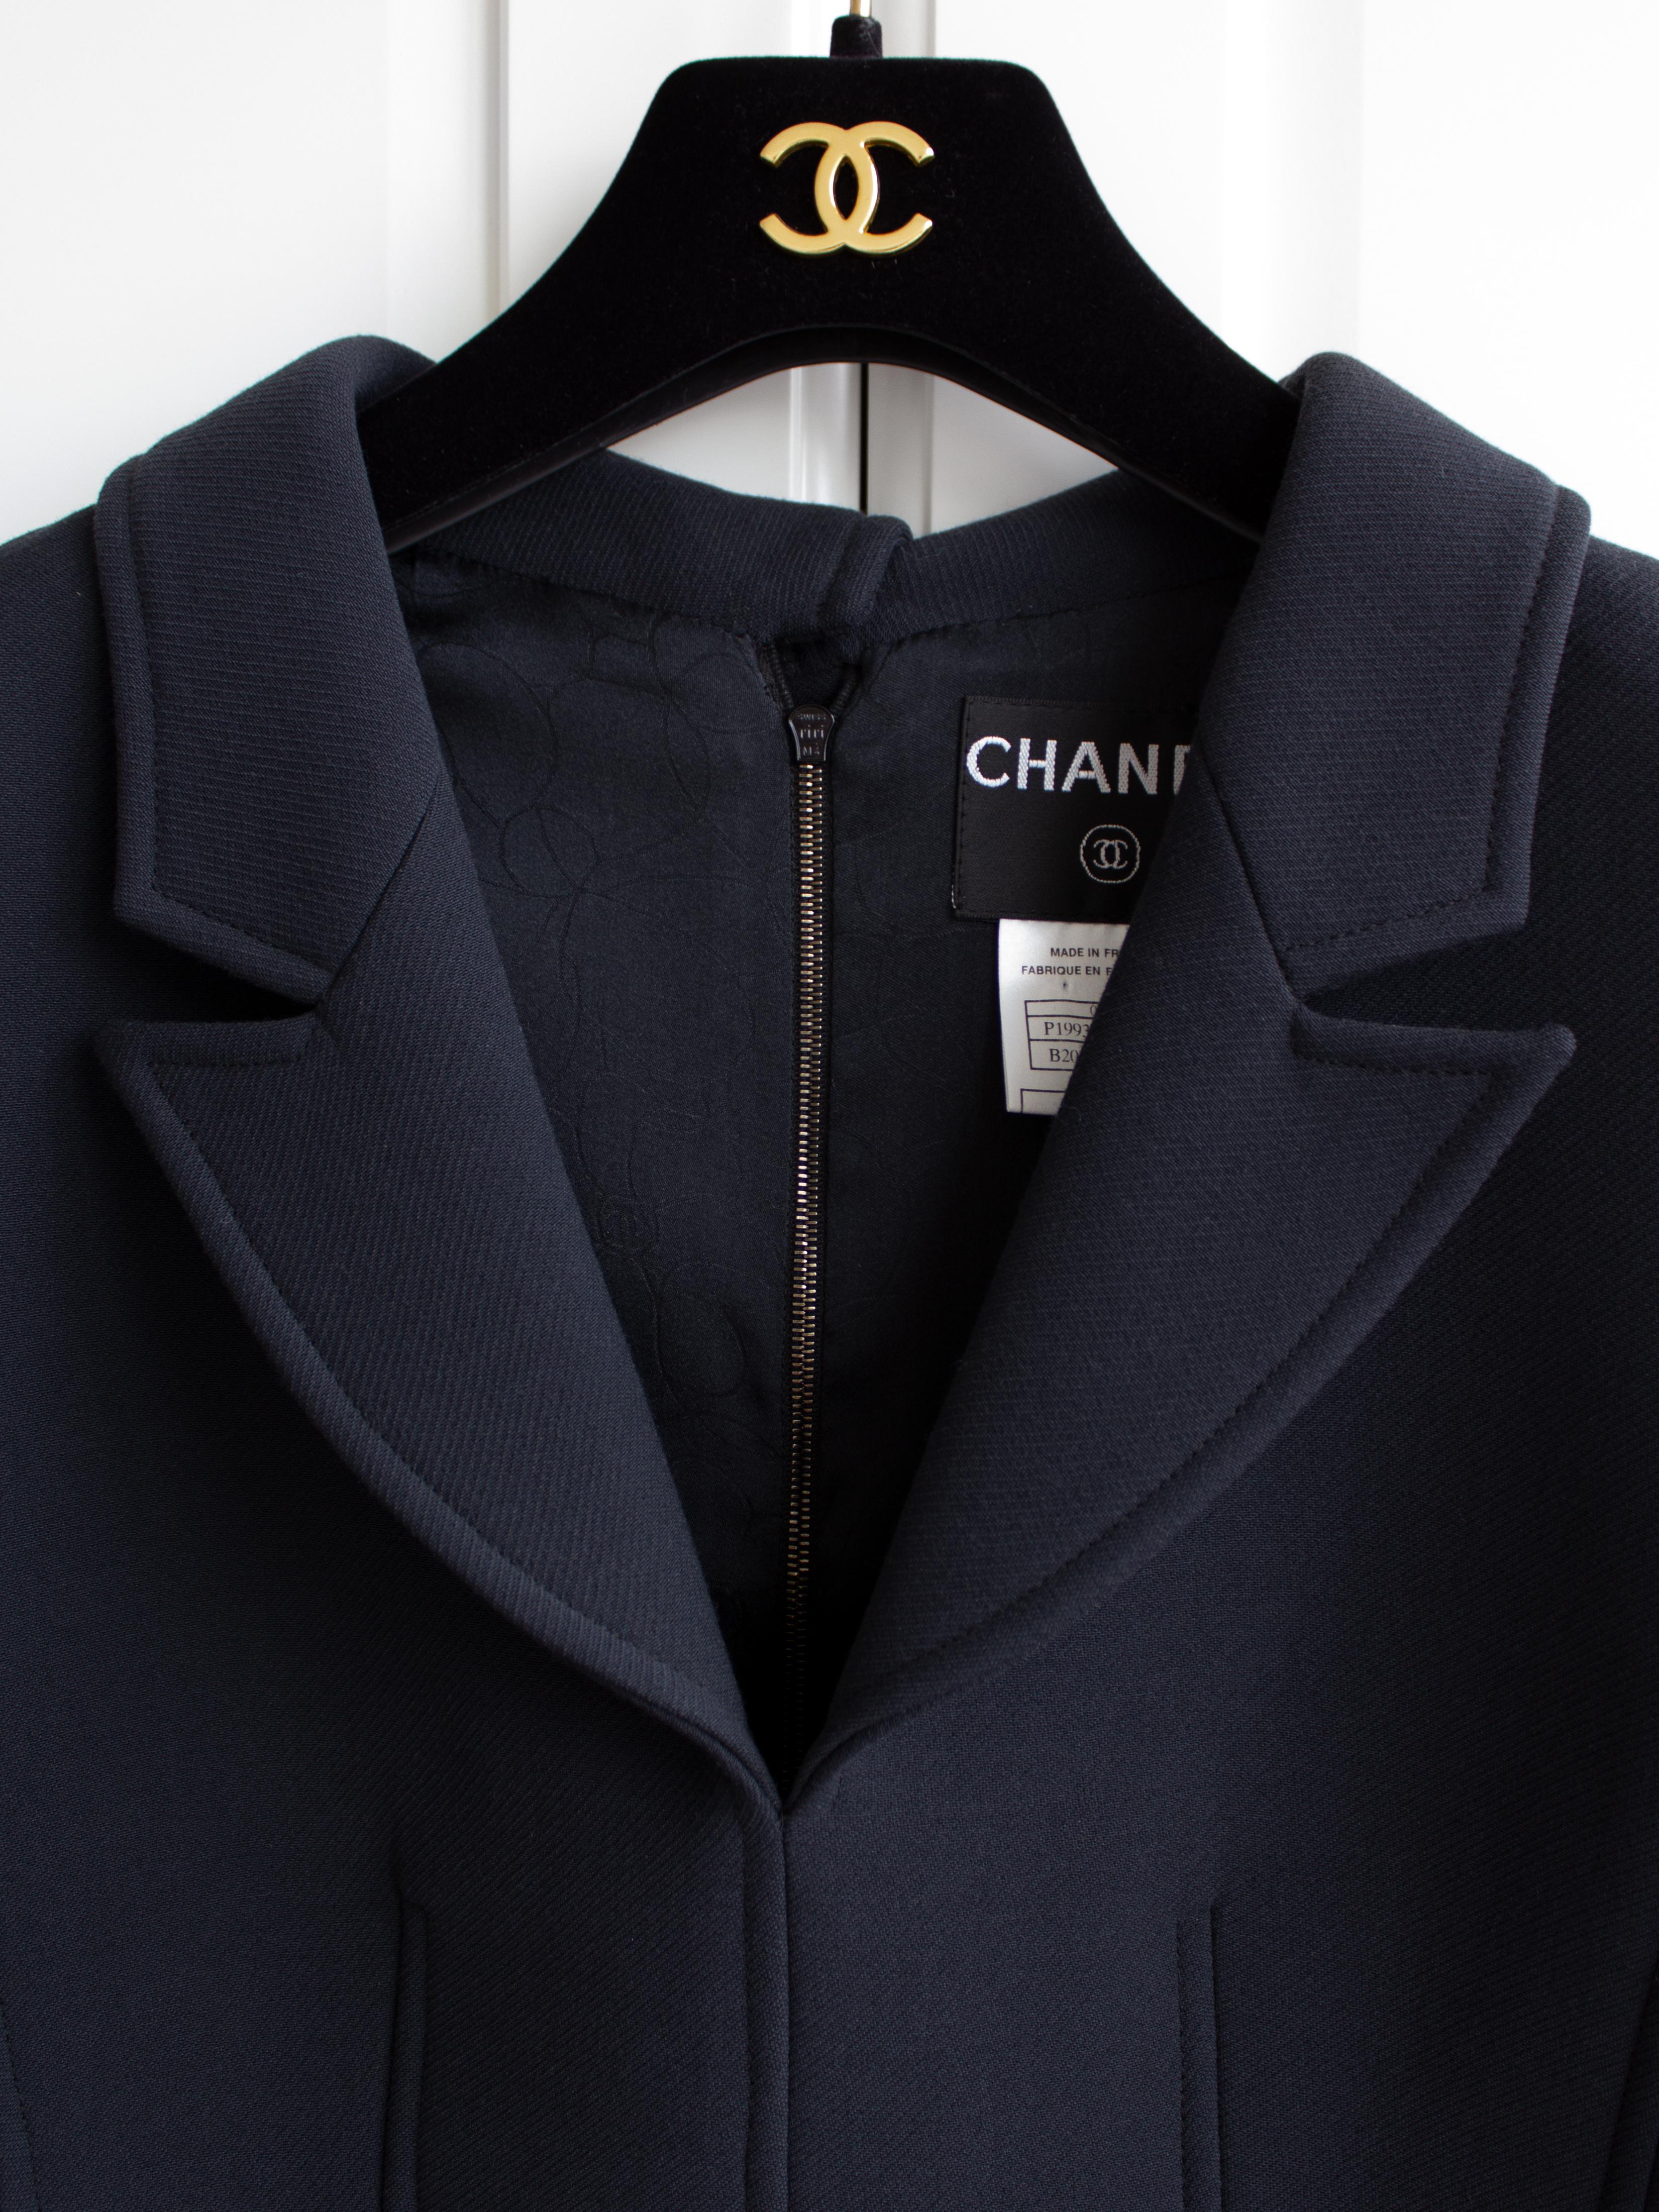 Women's Chanel Vintage Fall 2002 Navy Blue Embellished Silver Crystal 02A Top Jacket For Sale